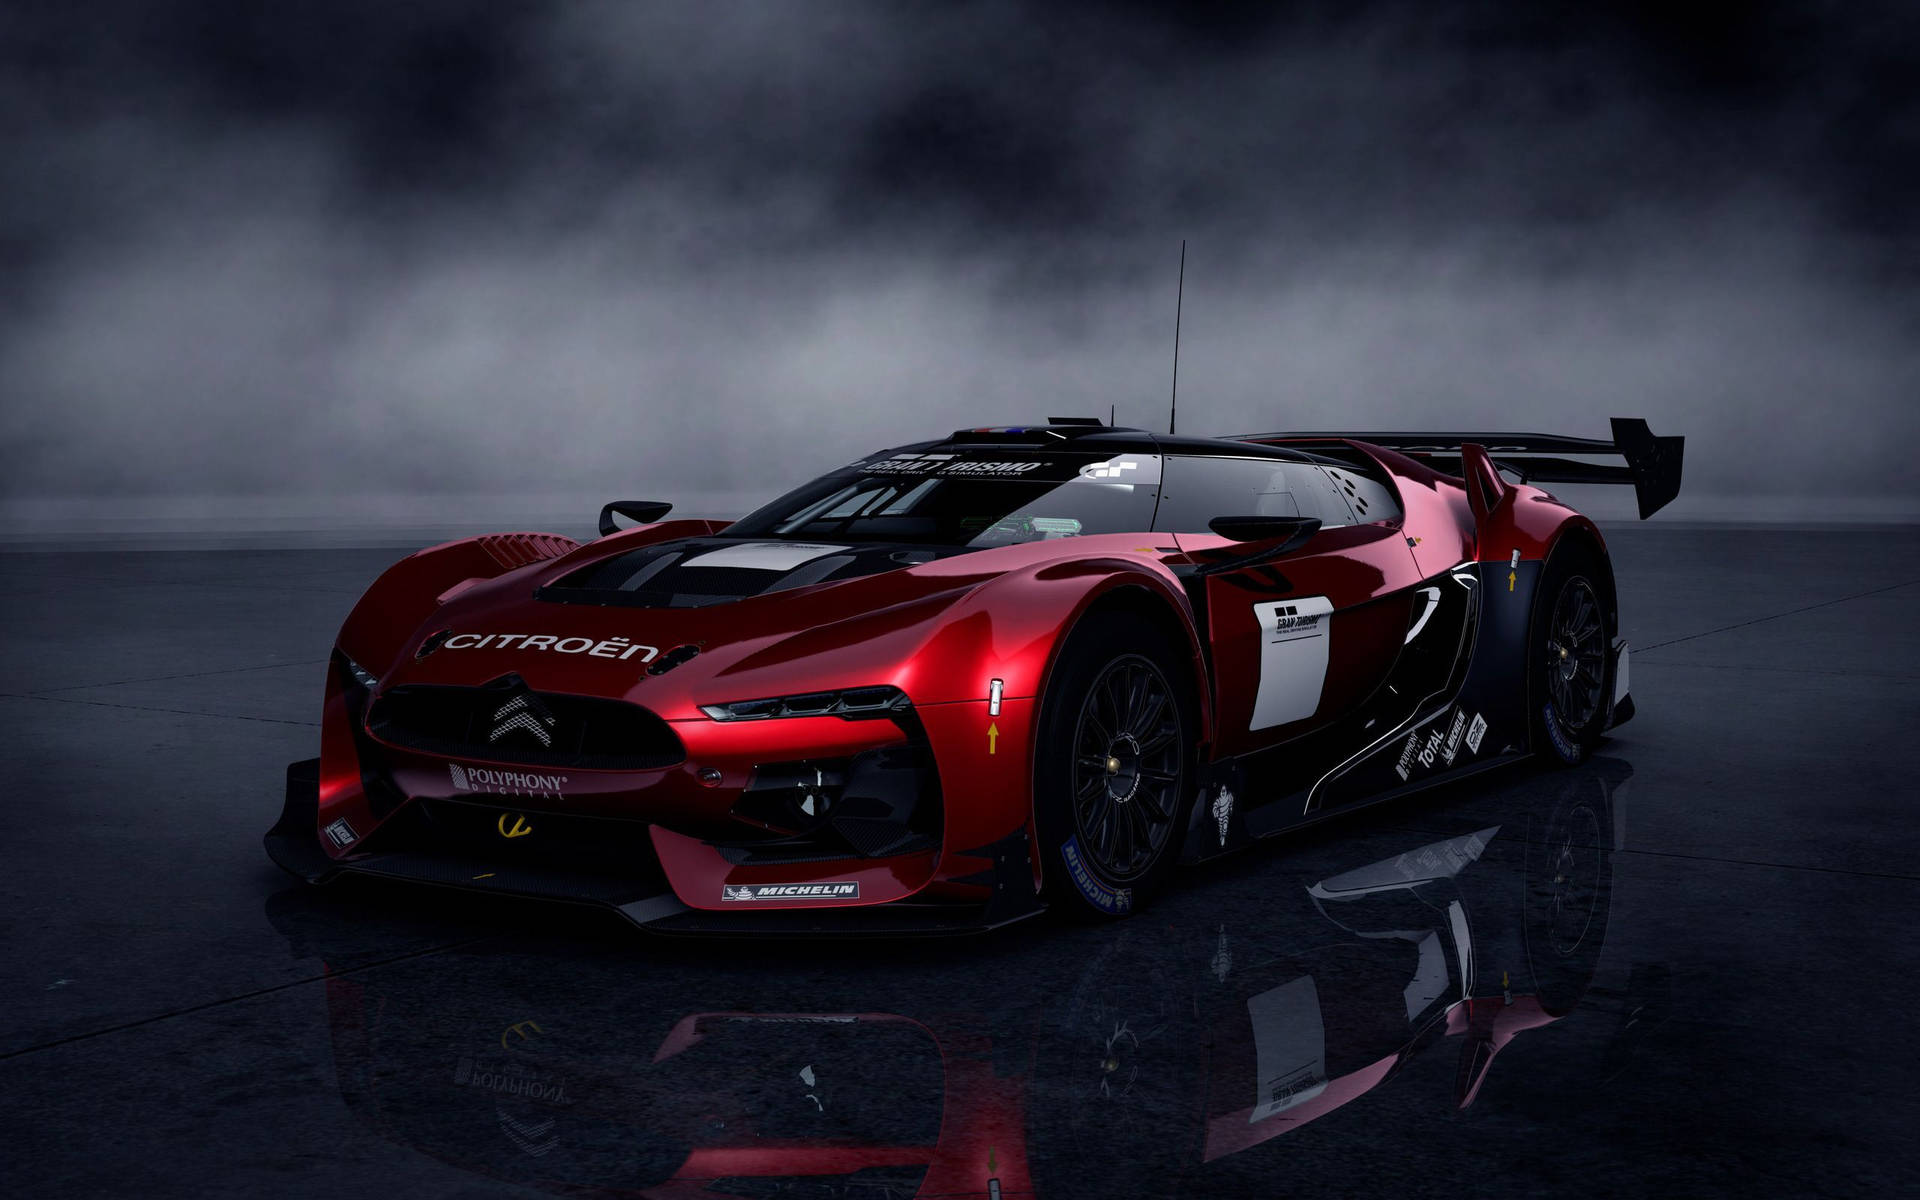 Supercar Gt By Citroën Background